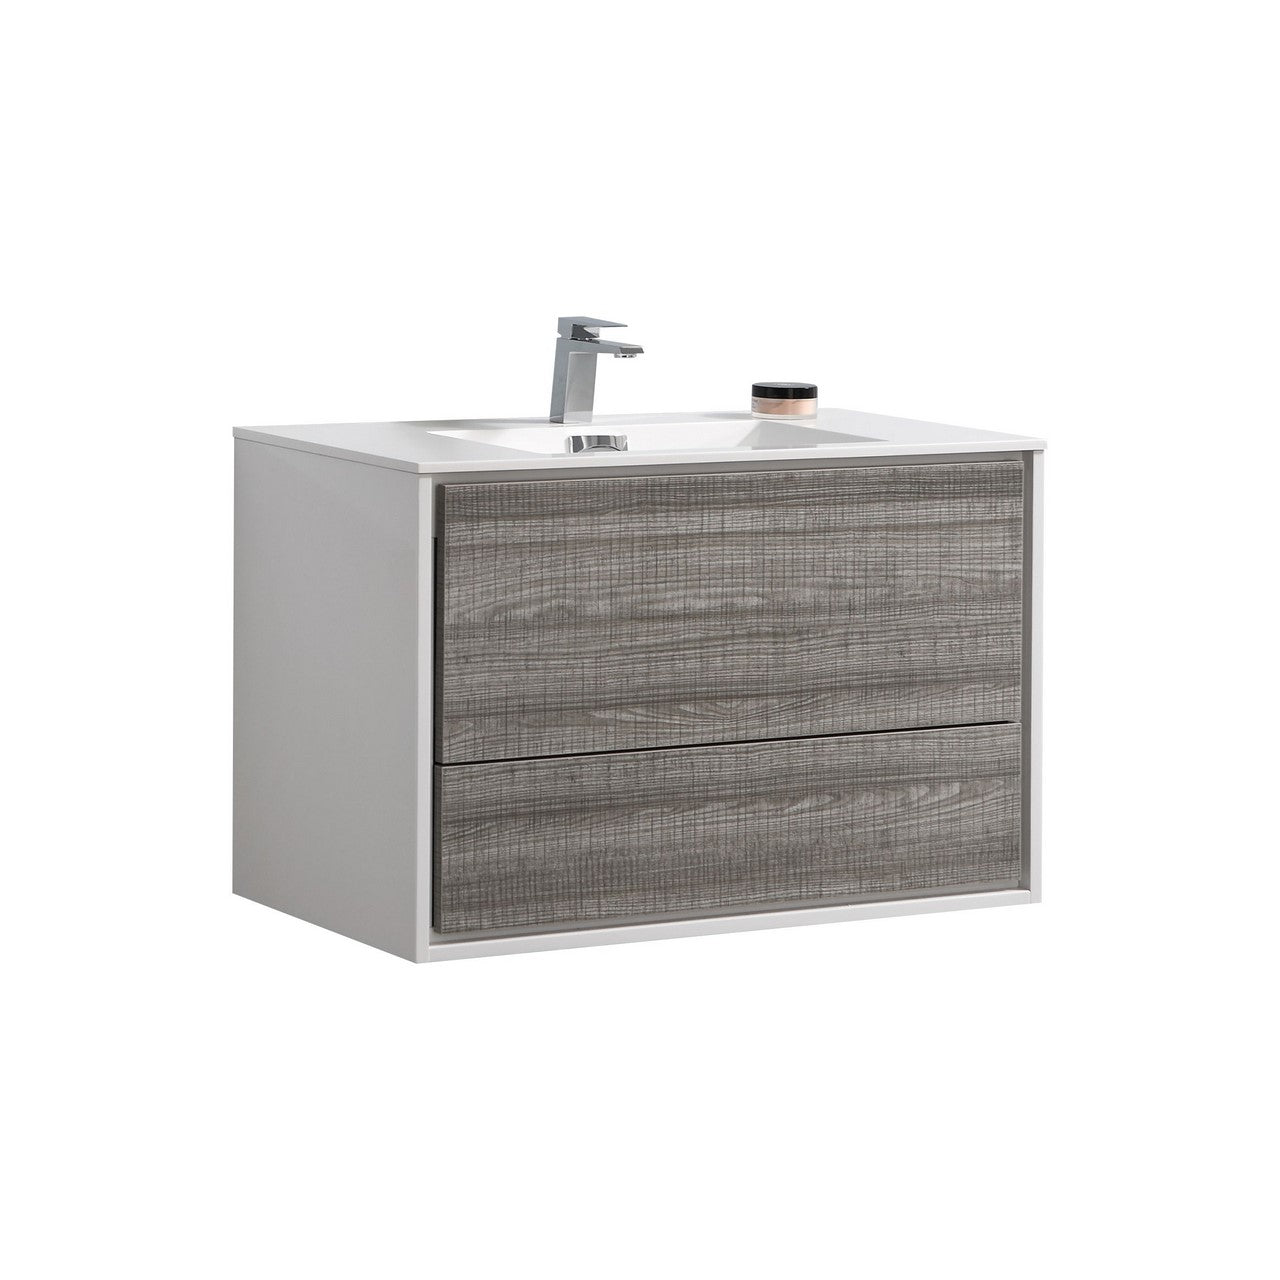 KUBEBATH De Lusso DL36-HGASH 36" Single Wall Mount Bathroom Vanity in Ash Gray with White Acrylic Composite, Integrated Sink, Angled View